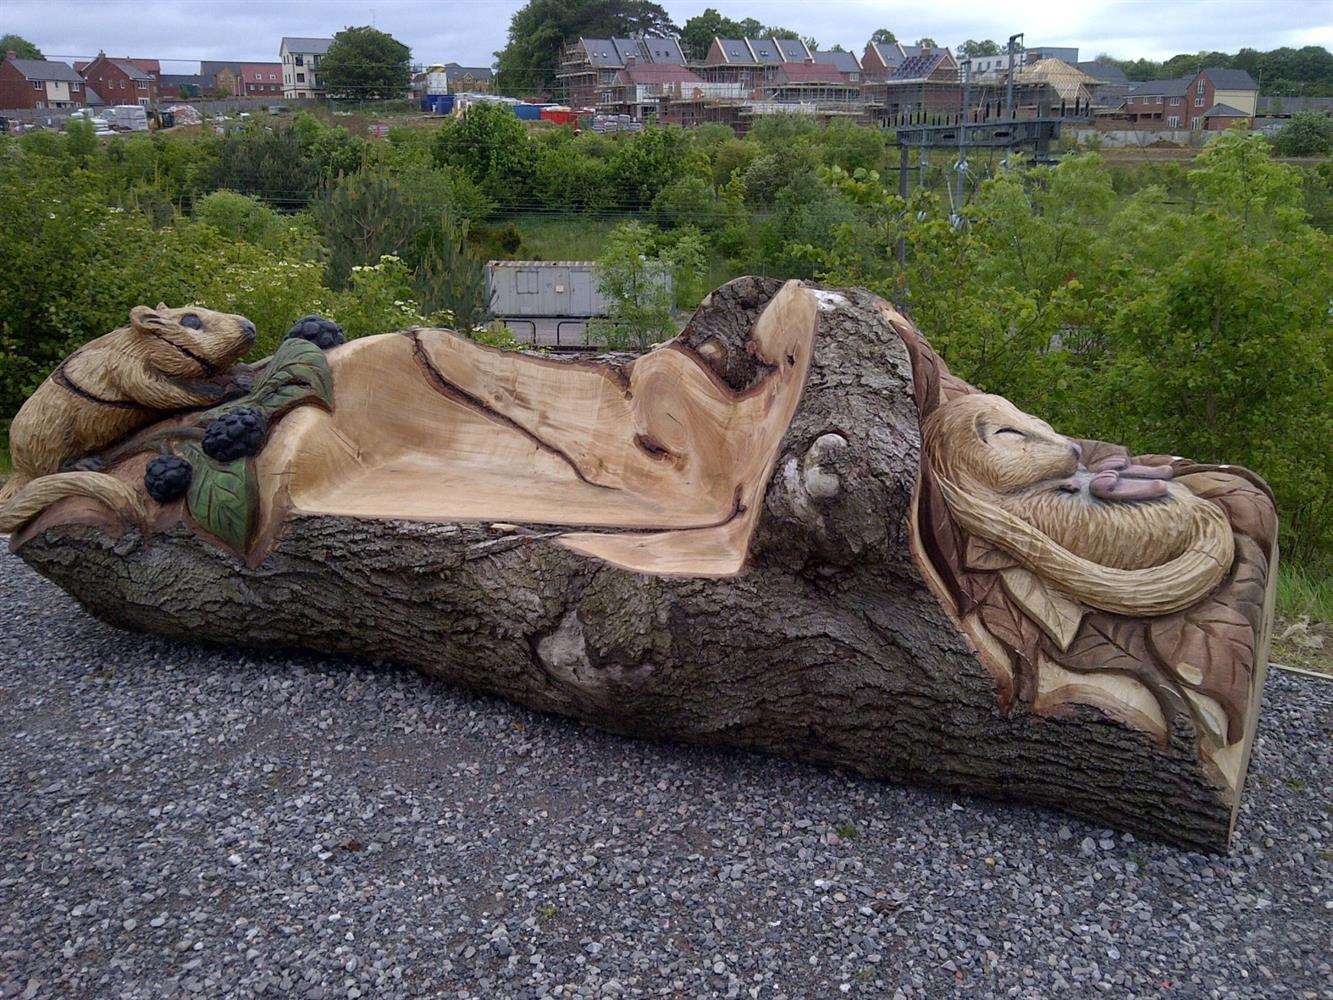 The eye-catching dormouse bench